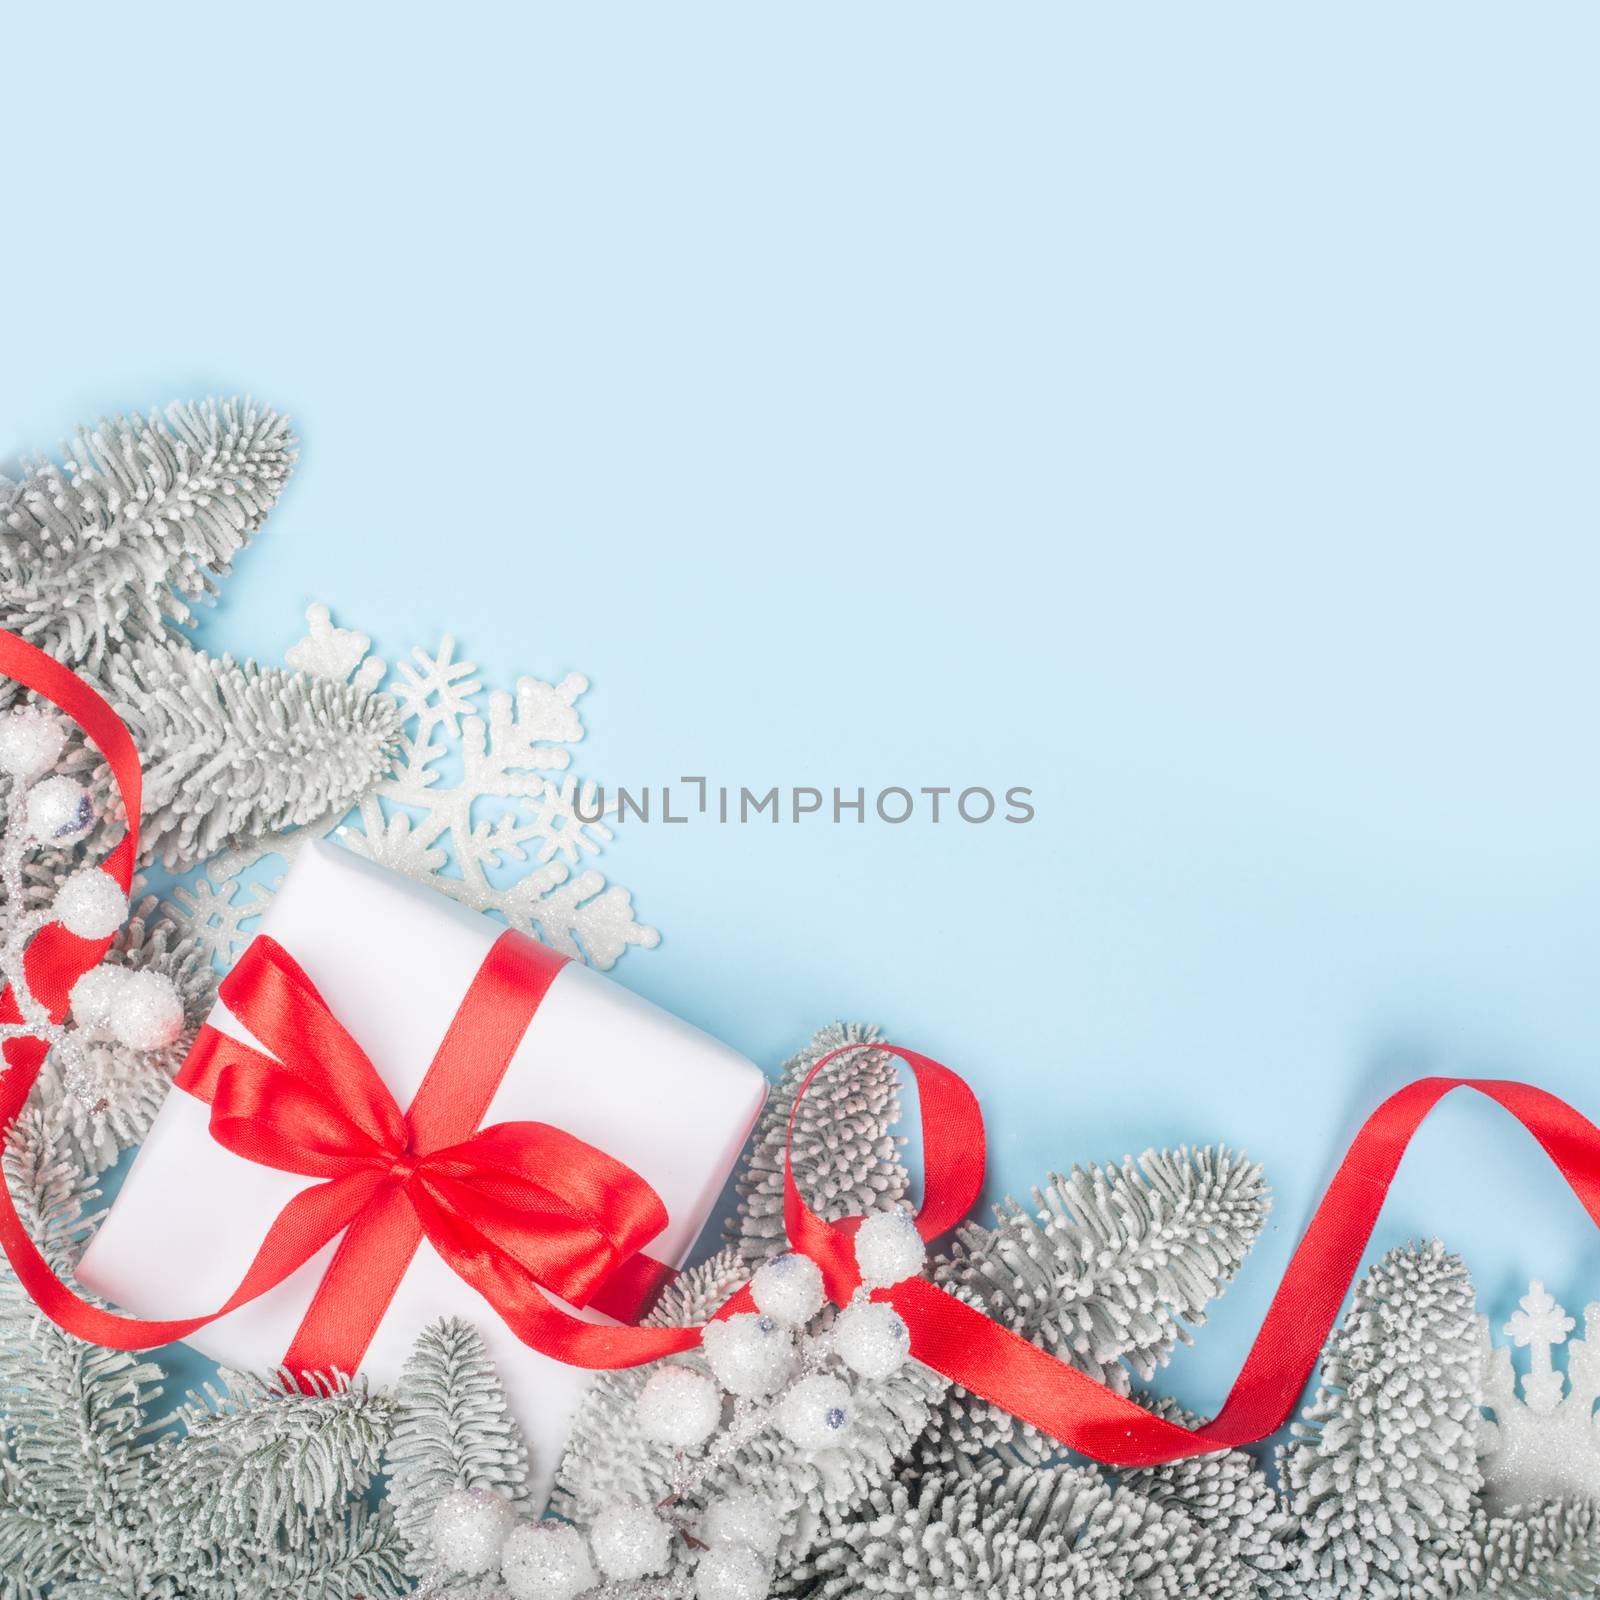 Frosted fir tree twigs and Christmas decorative gift with red ribbon on blue background with copy space for text template flat lay top view design